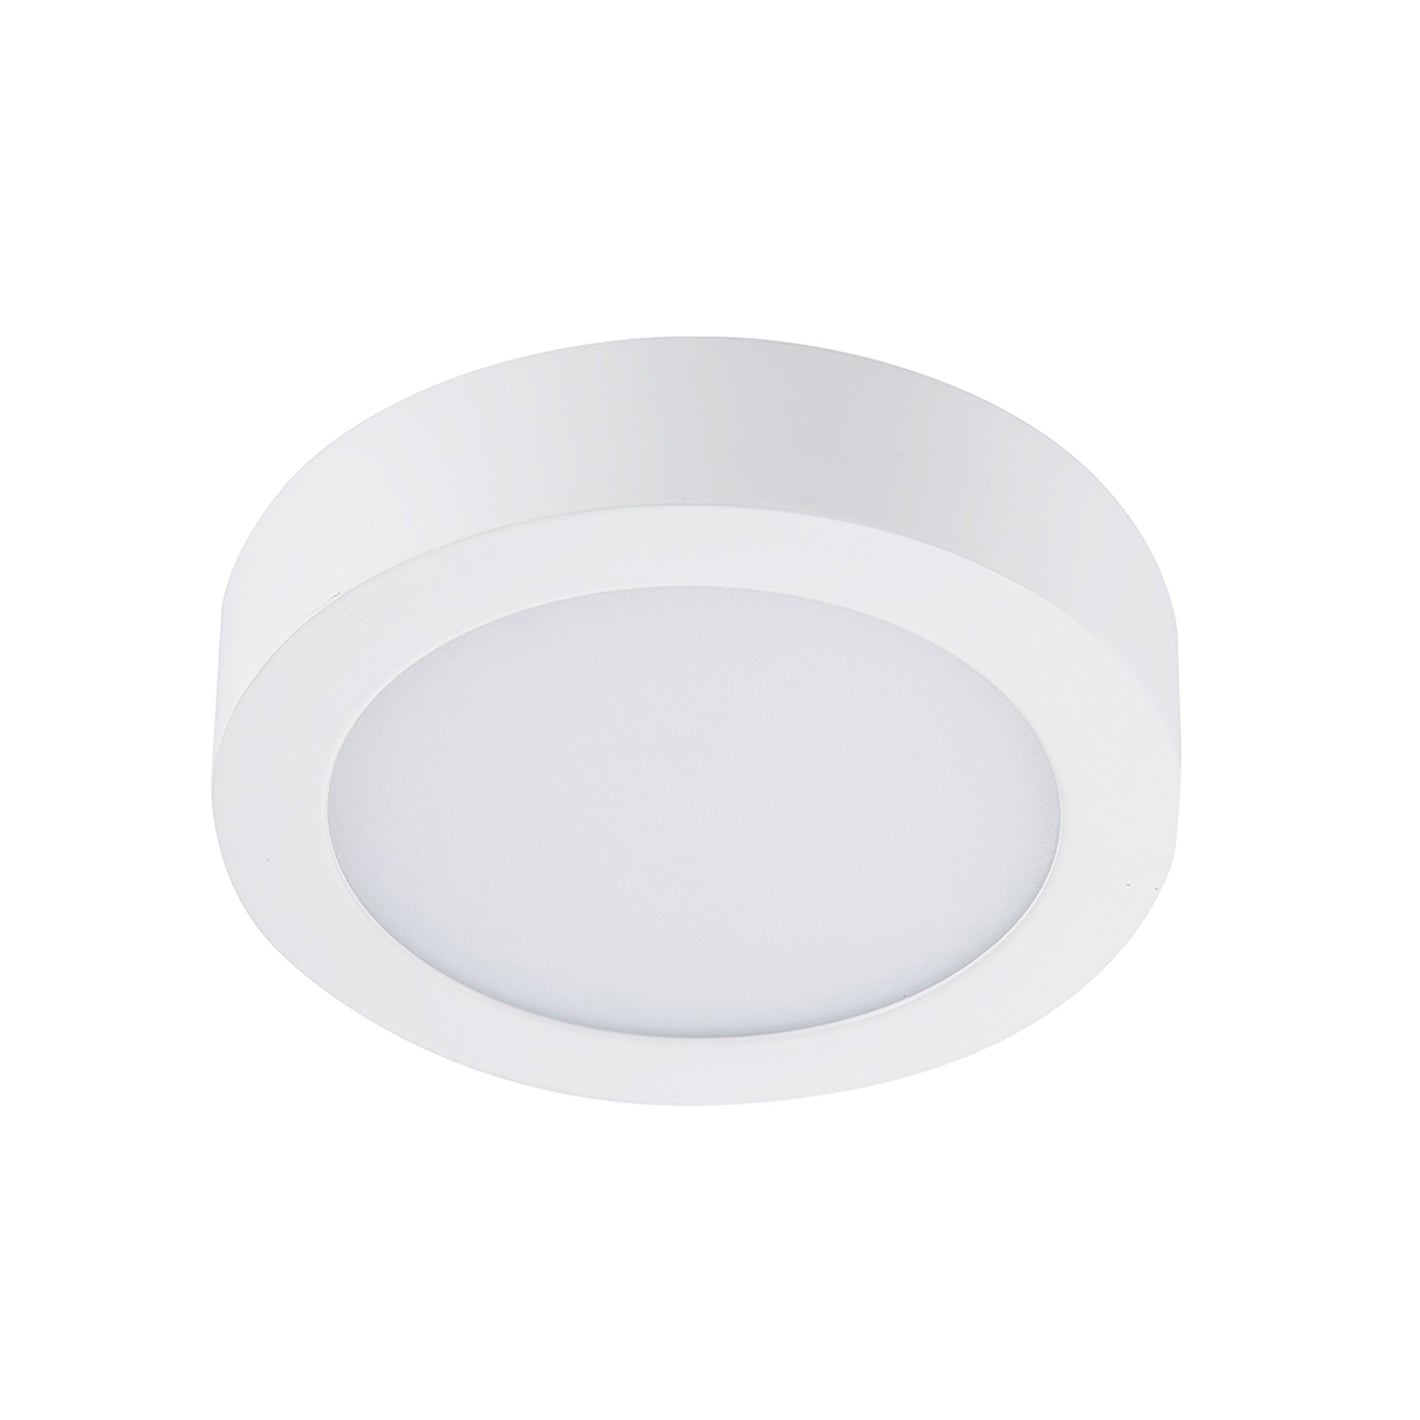 9 Inch 5CCT Color Selectable Surface Mount Panel Light Fixture, White Finish